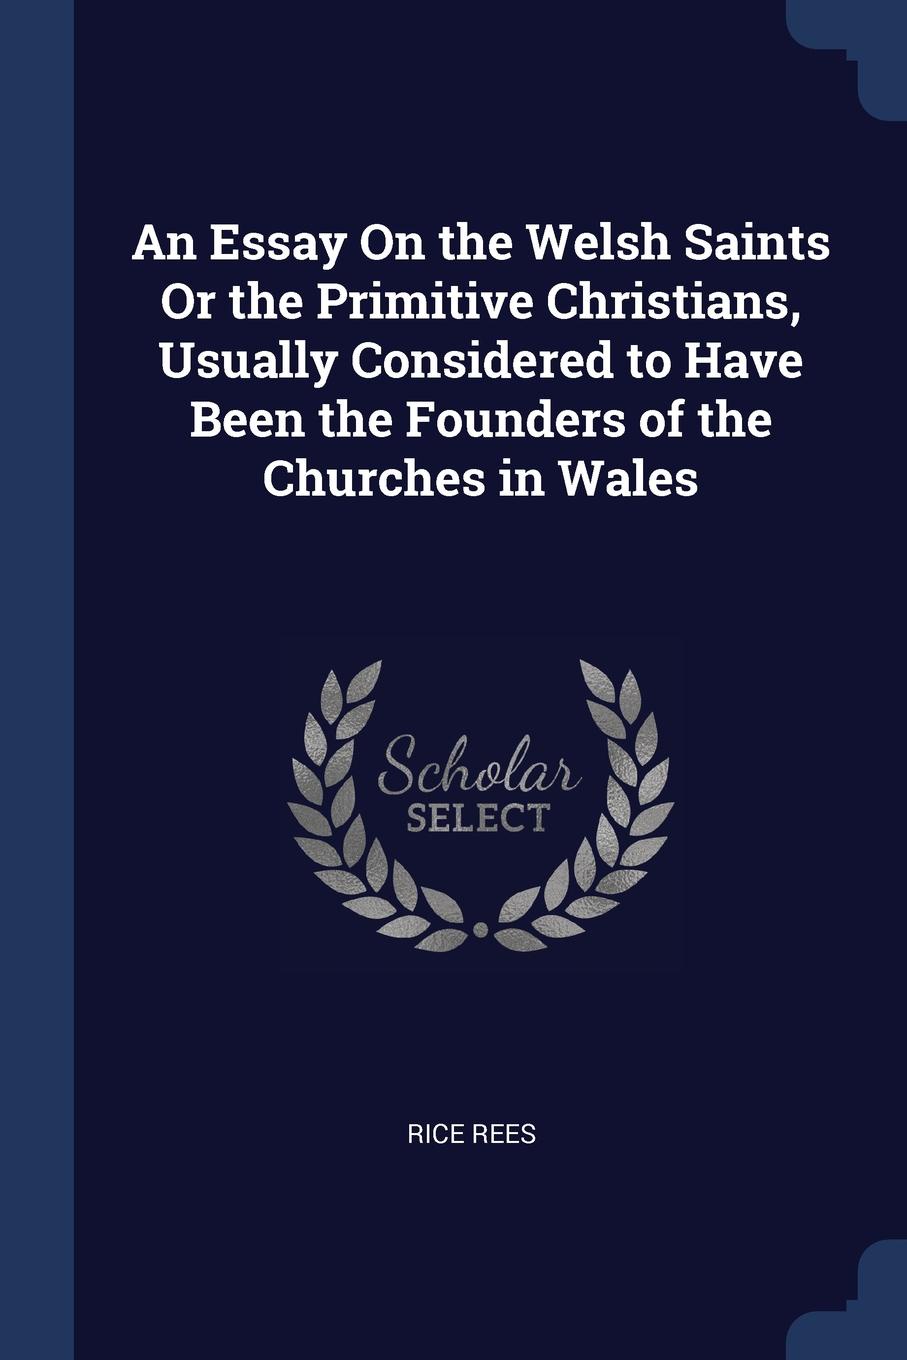 An Essay On the Welsh Saints Or the Primitive Christians, Usually Considered to Have Been the Founders of the Churches in Wales